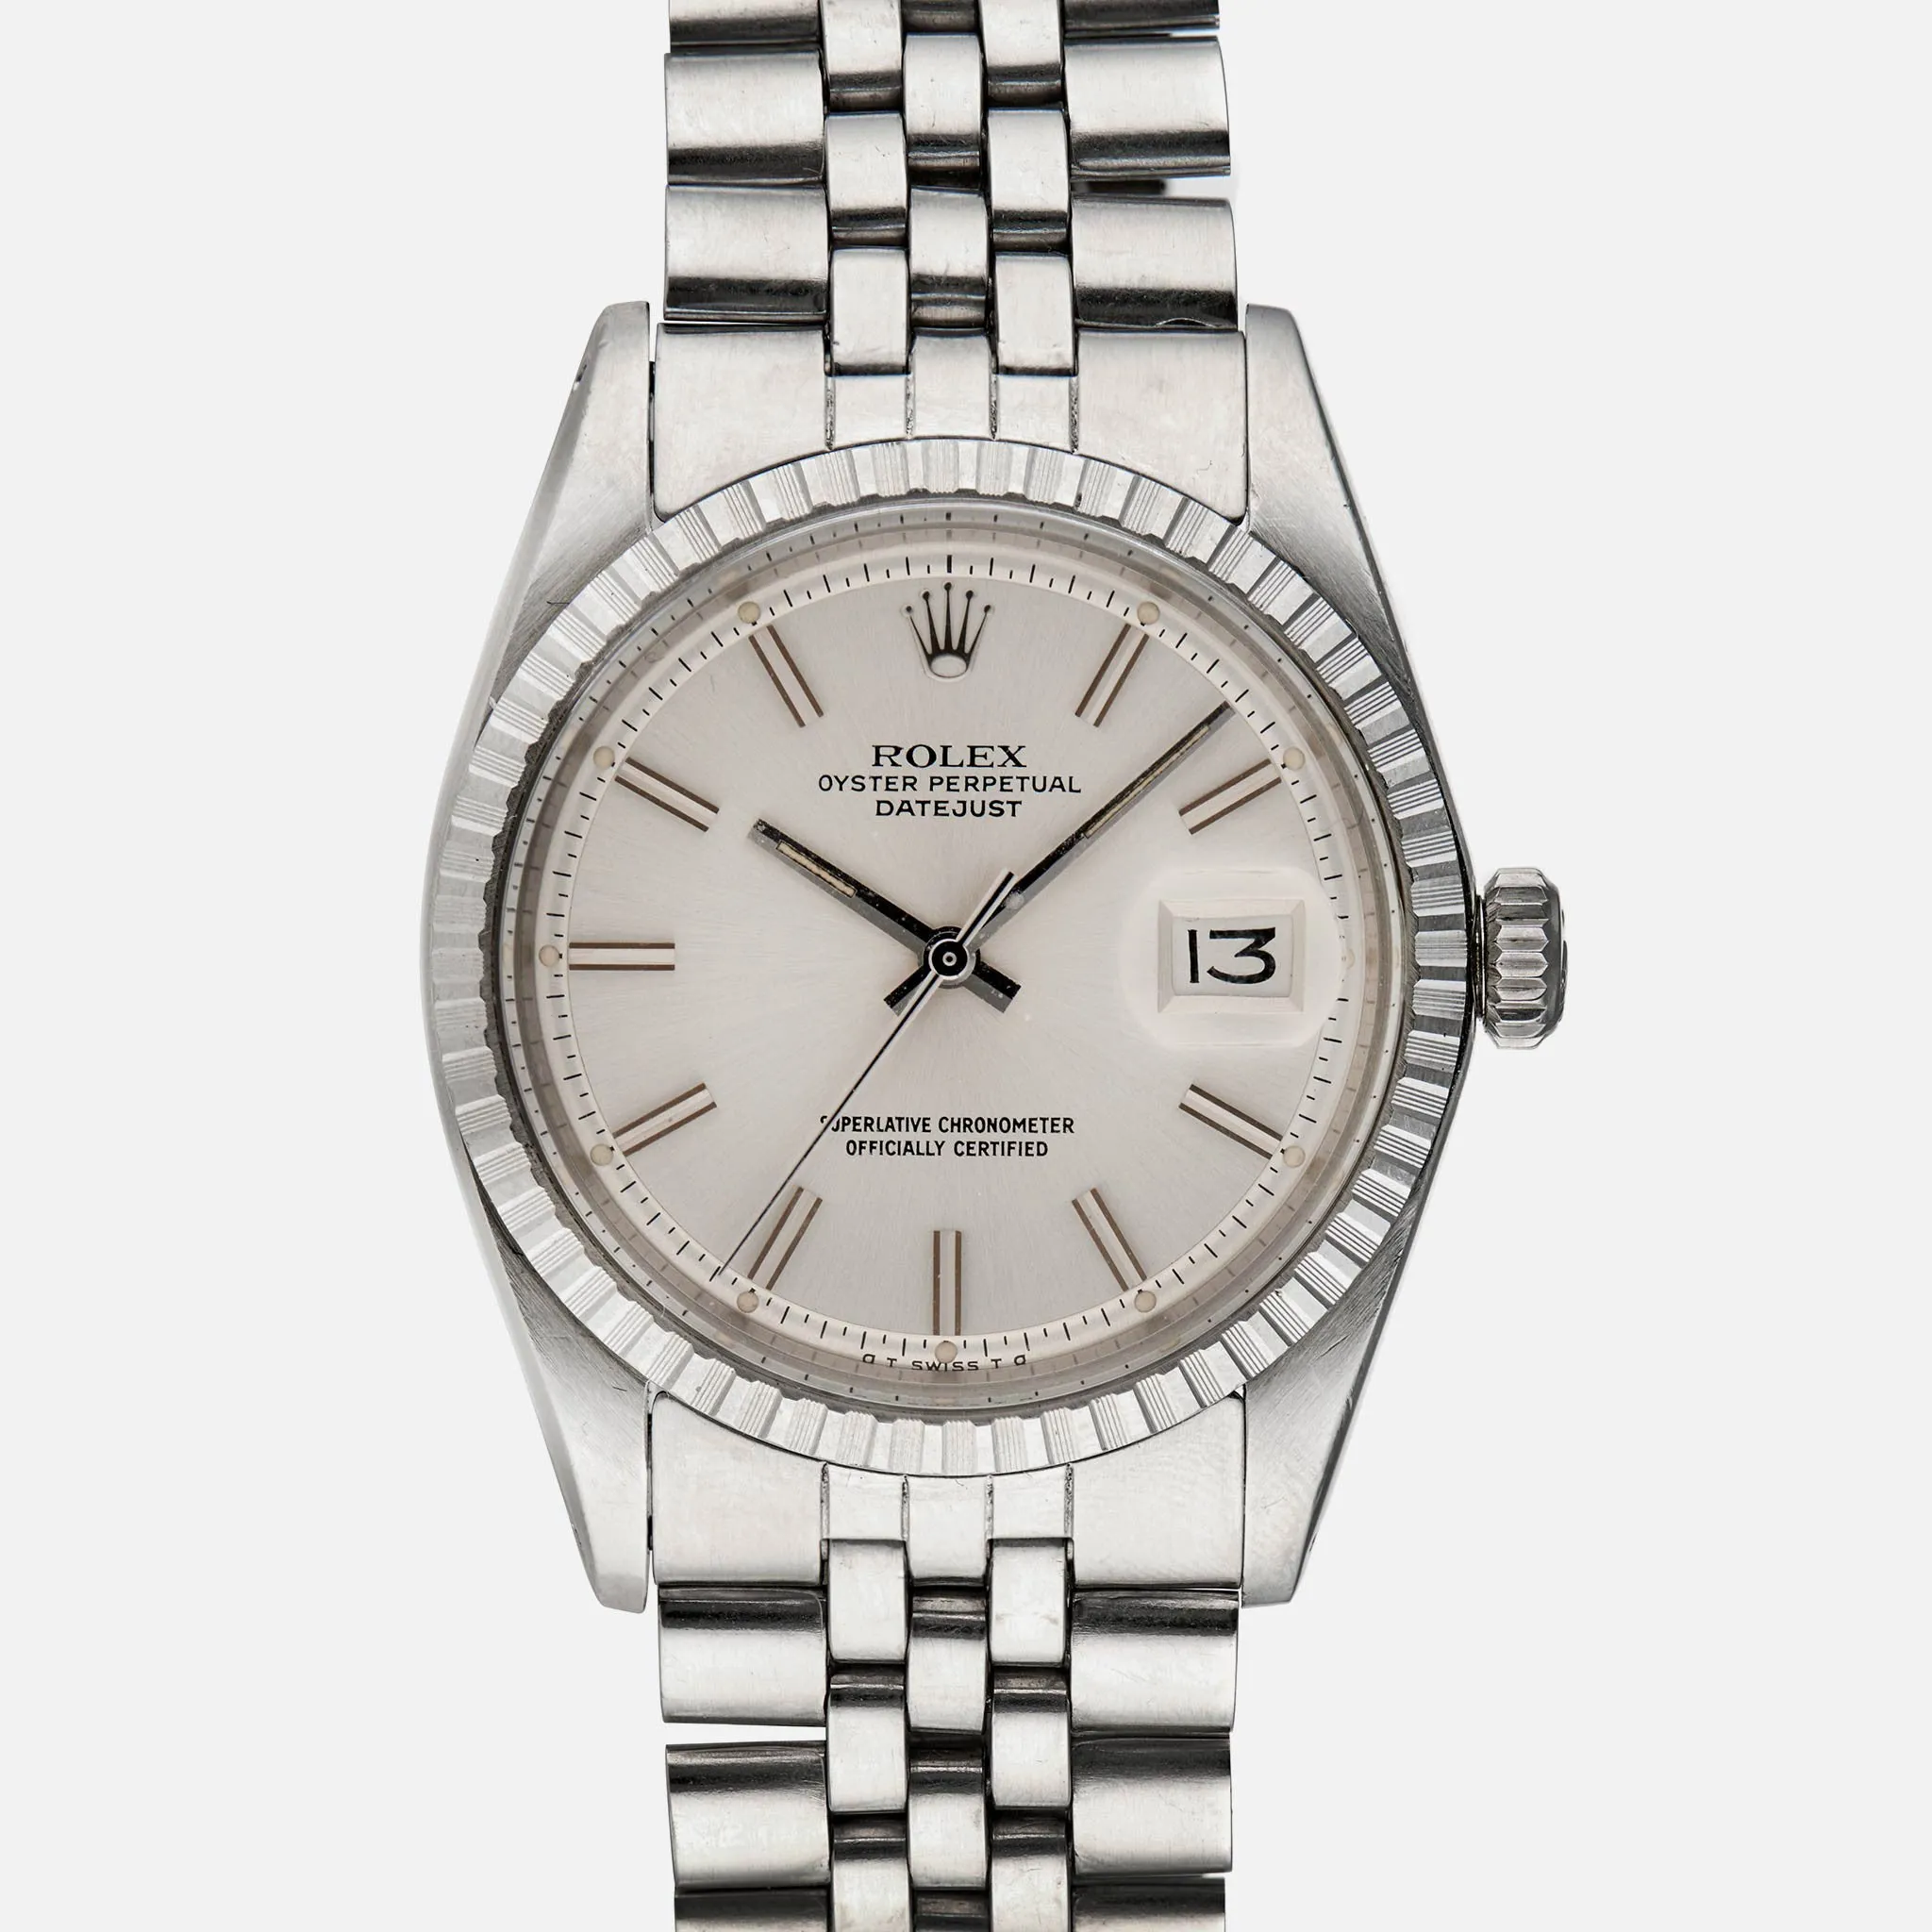 Rolex Datejust 1603 36mm Stainless steel Silvered